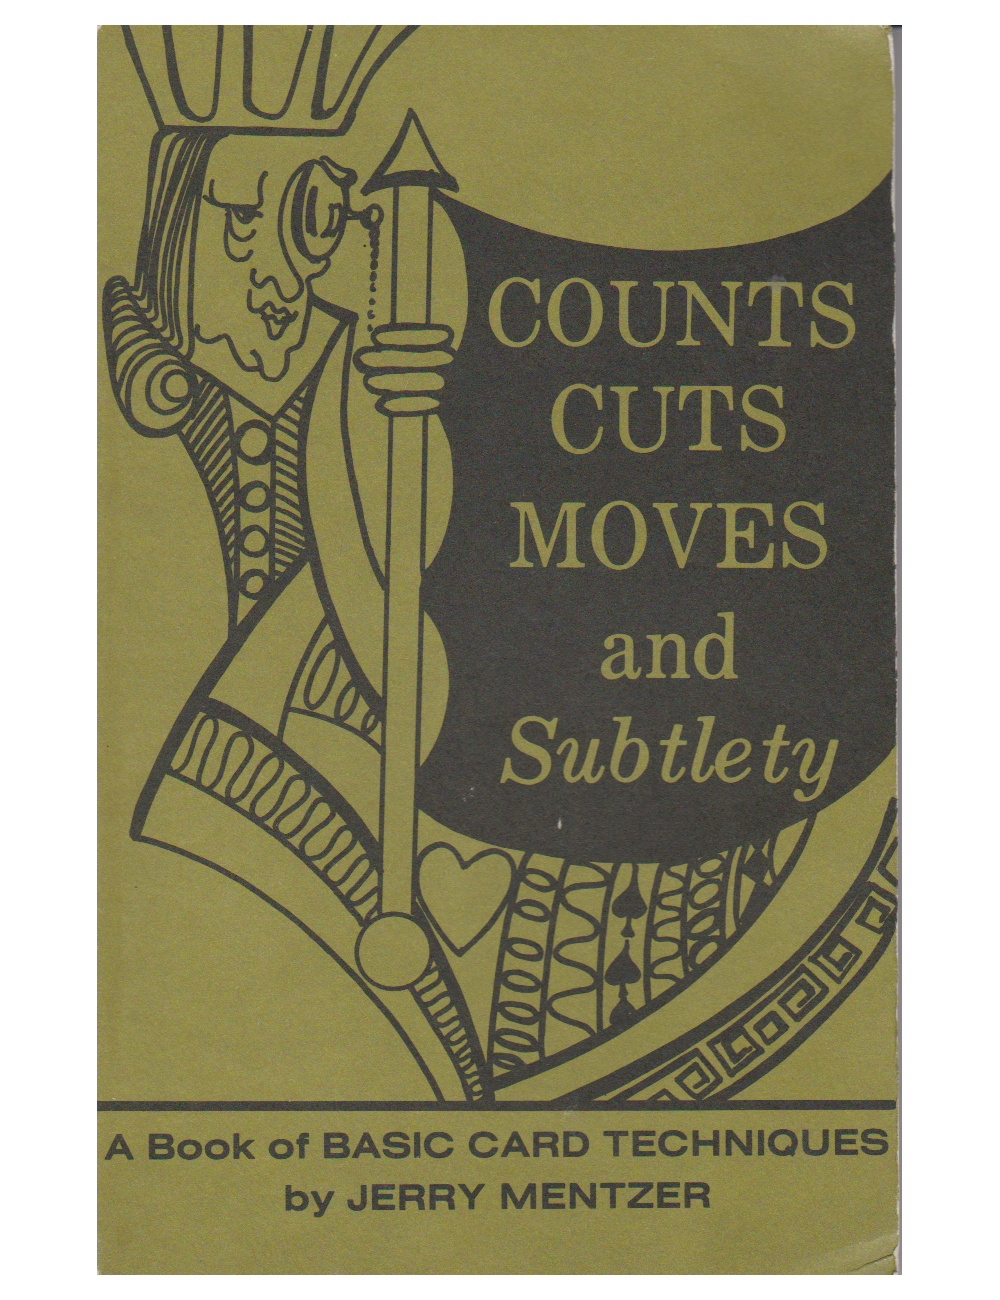 COUNTS CUTS MOVES and Subtlety (Jerry Mentzer)